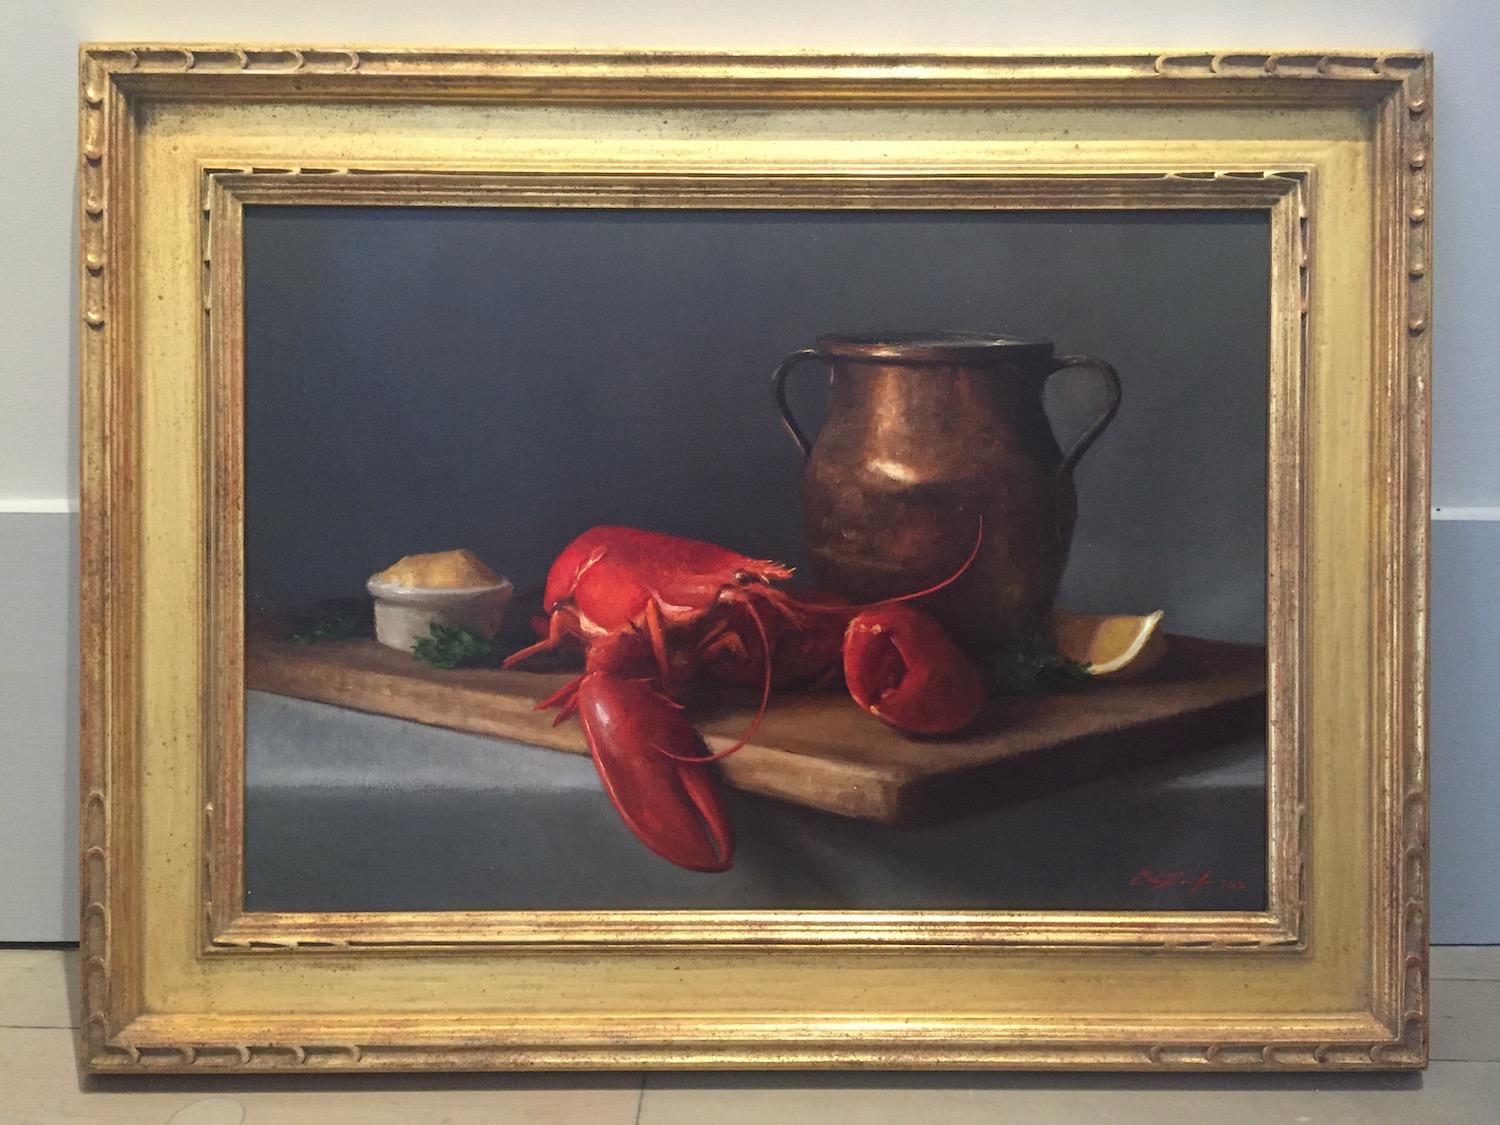 Lobster and Copper Pot - Painting by Sarah Lamb